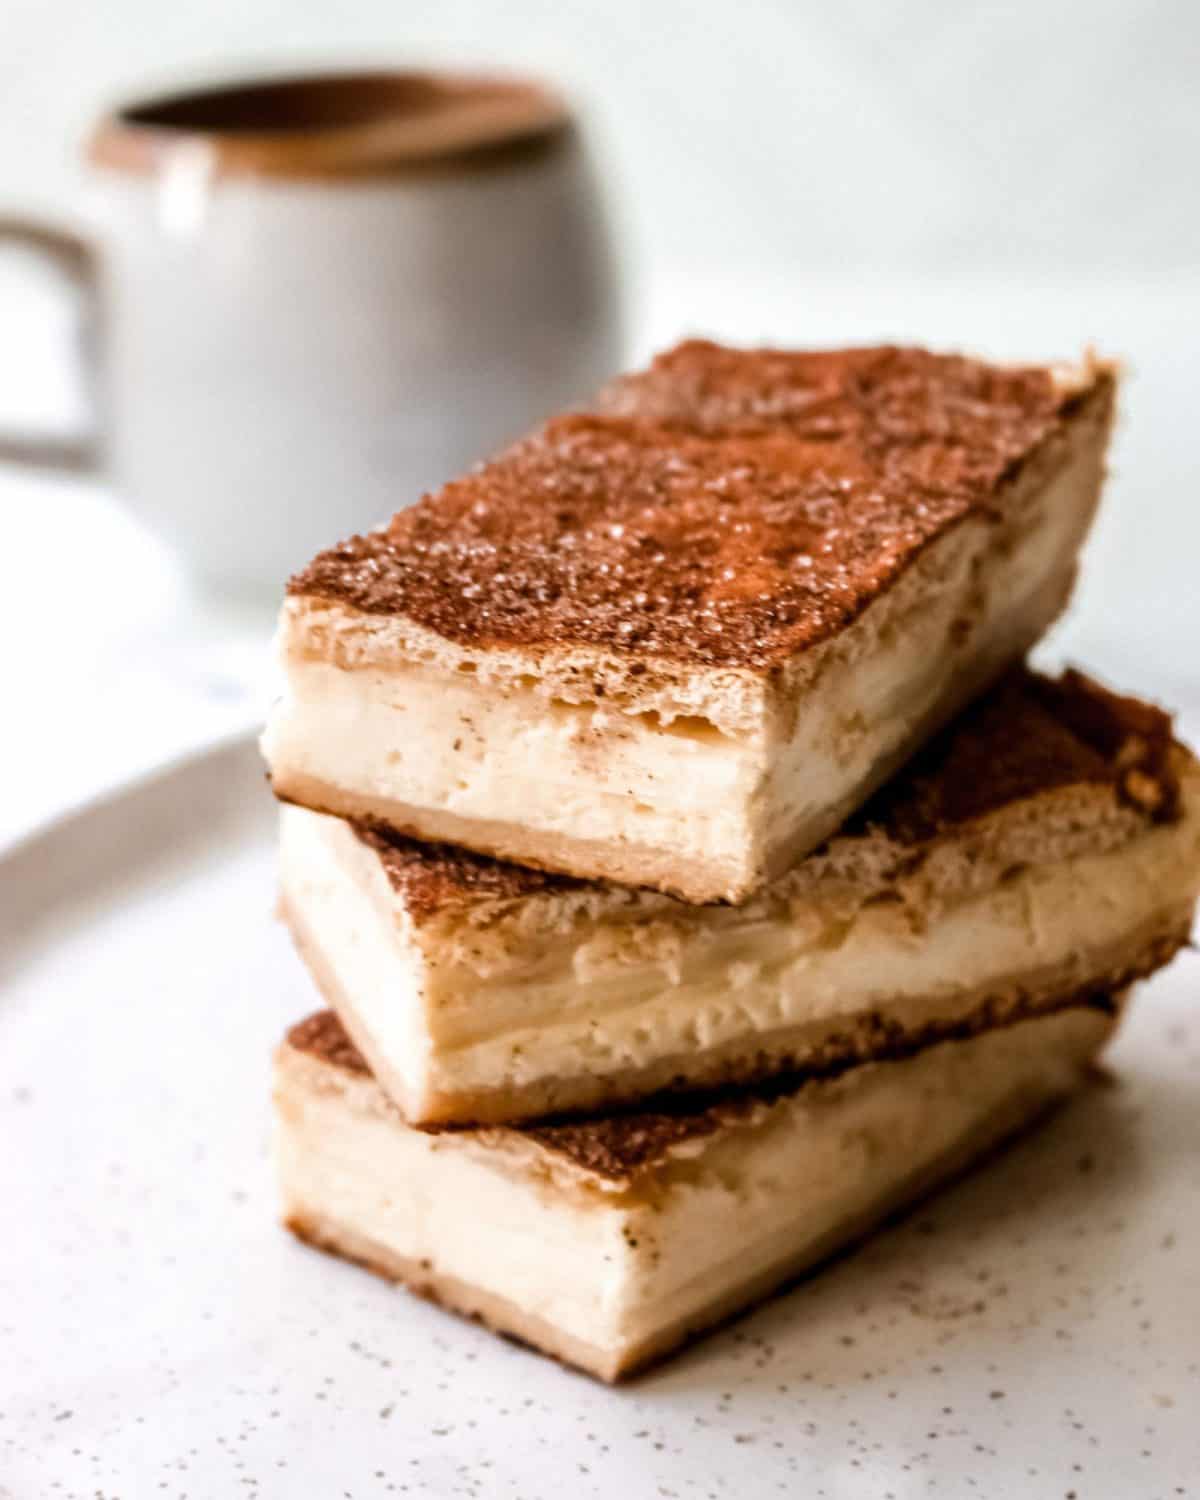 Finished cheesecake bars on a white plate with a cup of coffee in the background.